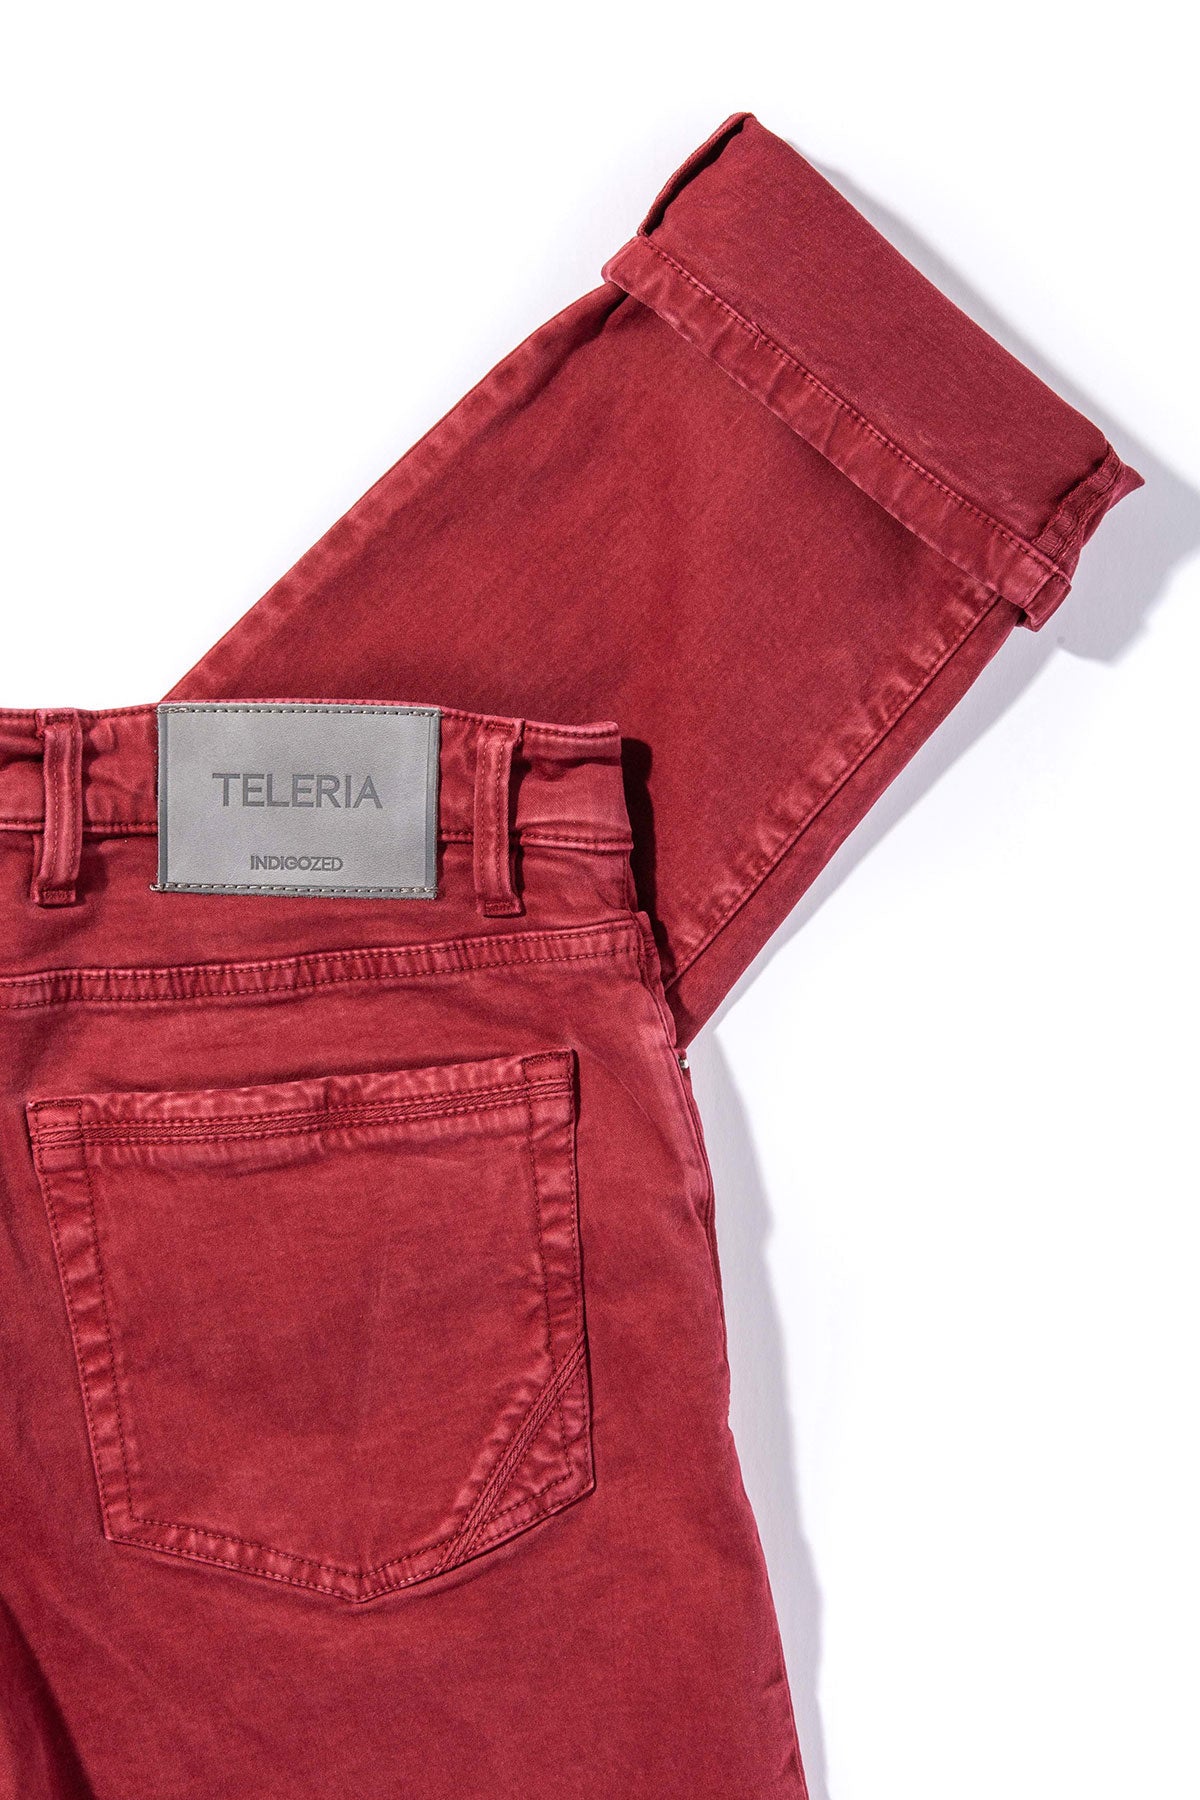 Ryland Rugged Soft Touch Cotton Jeans in Cherry | Mens - Pants - 5 Pocket | Teleria Zed